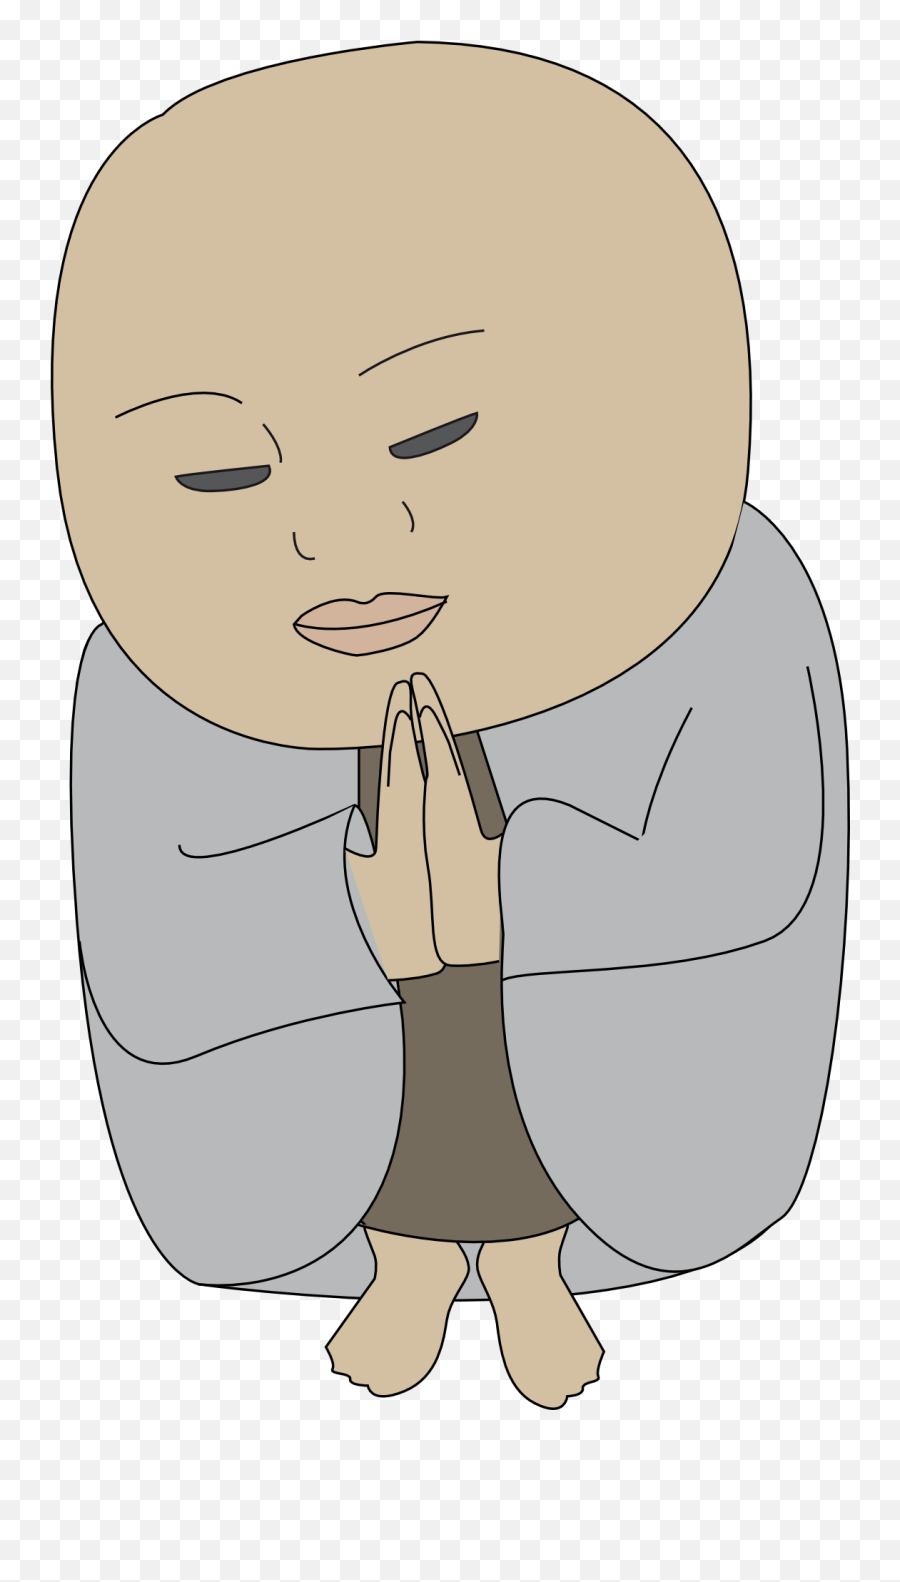 Chinese Person Praying Drawing Free Image Download Emoji,A Person Who Prays On Emotions